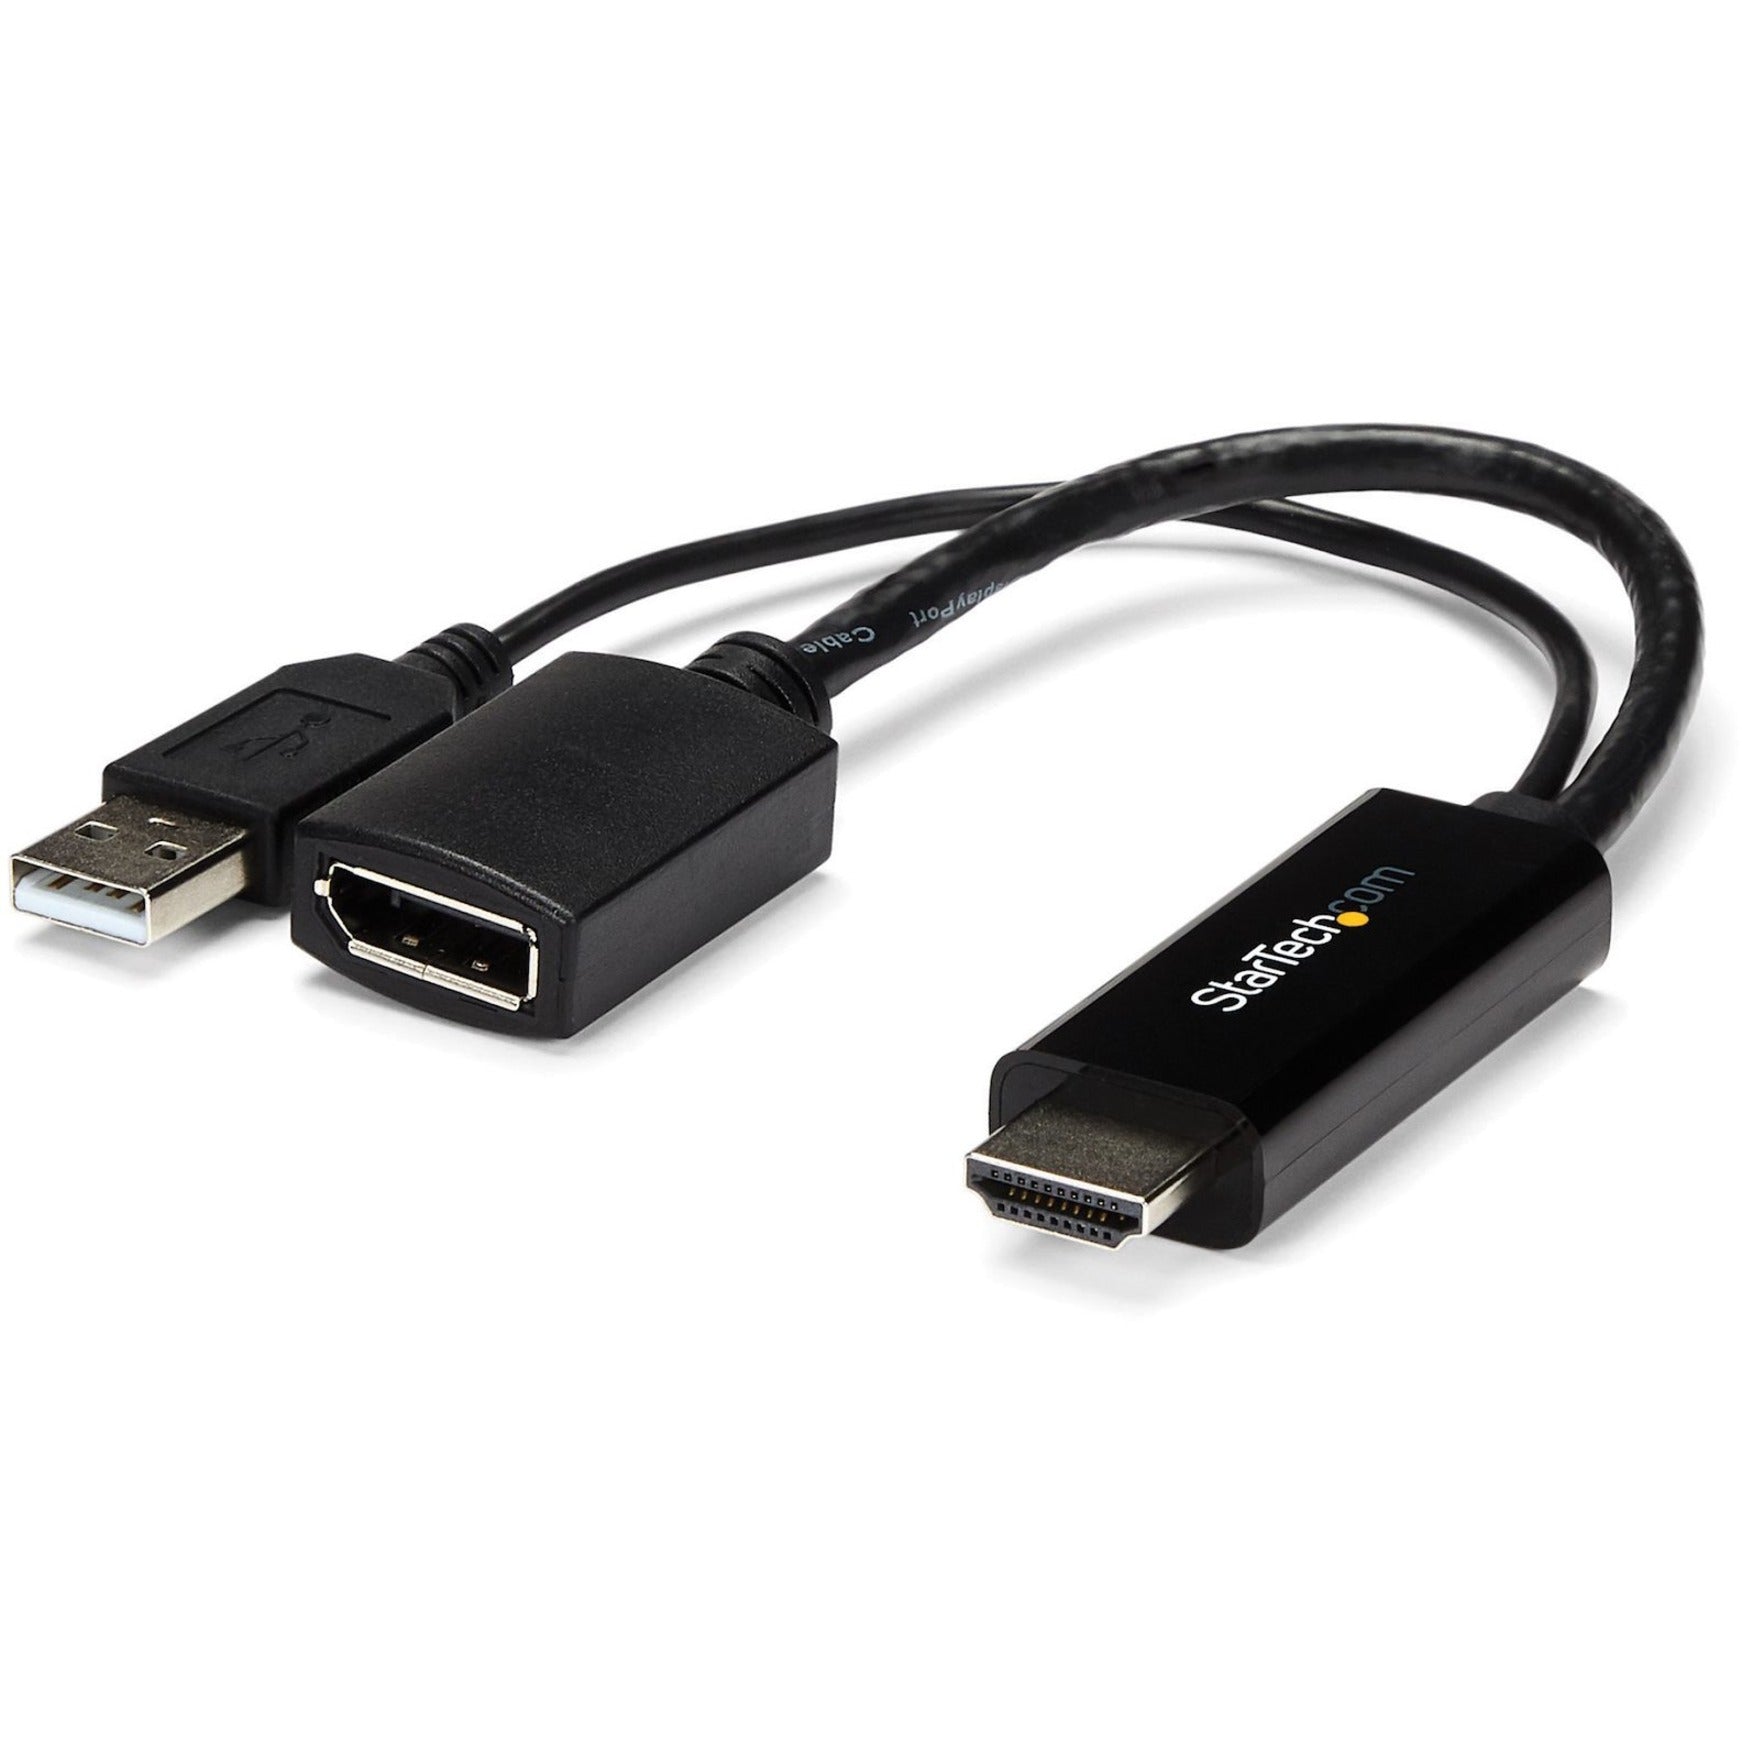 StarTech.com HD2DP HDMI to DisplayPort Converter- HDMI to DP Adapter with USB Power - 4K, Easy Plug-and-Play Video Adapter